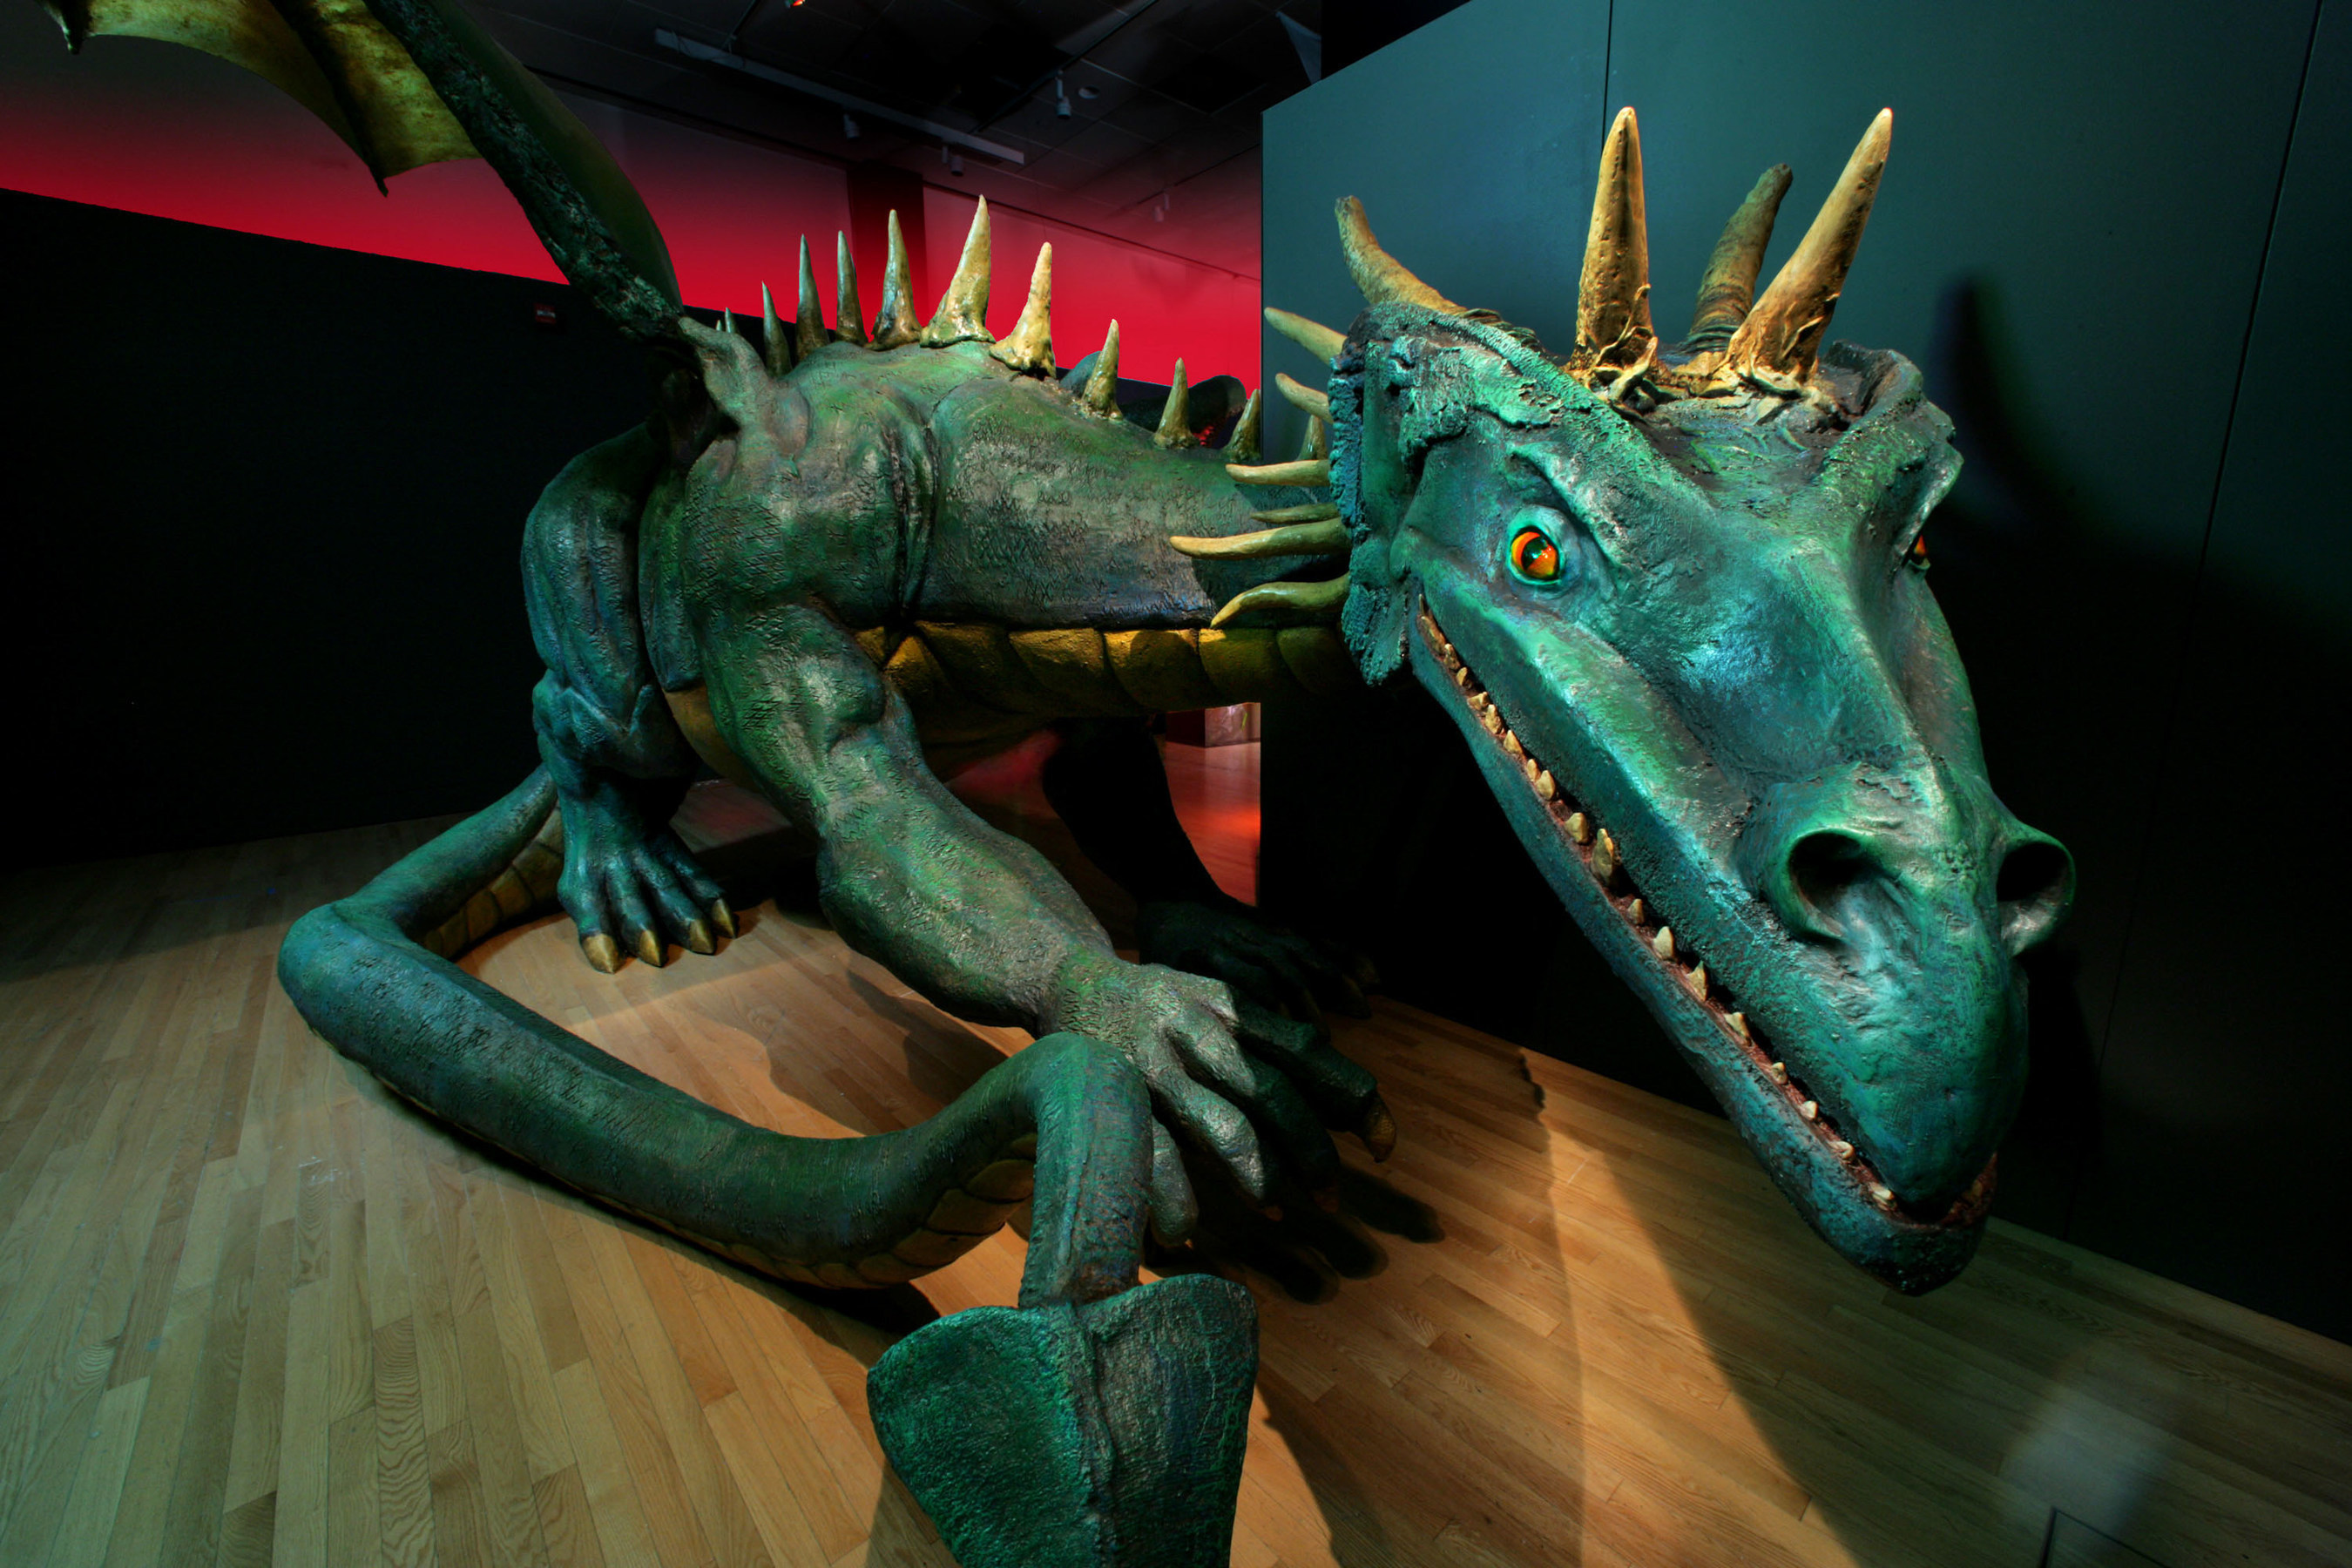 Mythic Creatures: Dragons, Unicorns and Mermaids at the Denver Museum of Nature & Science